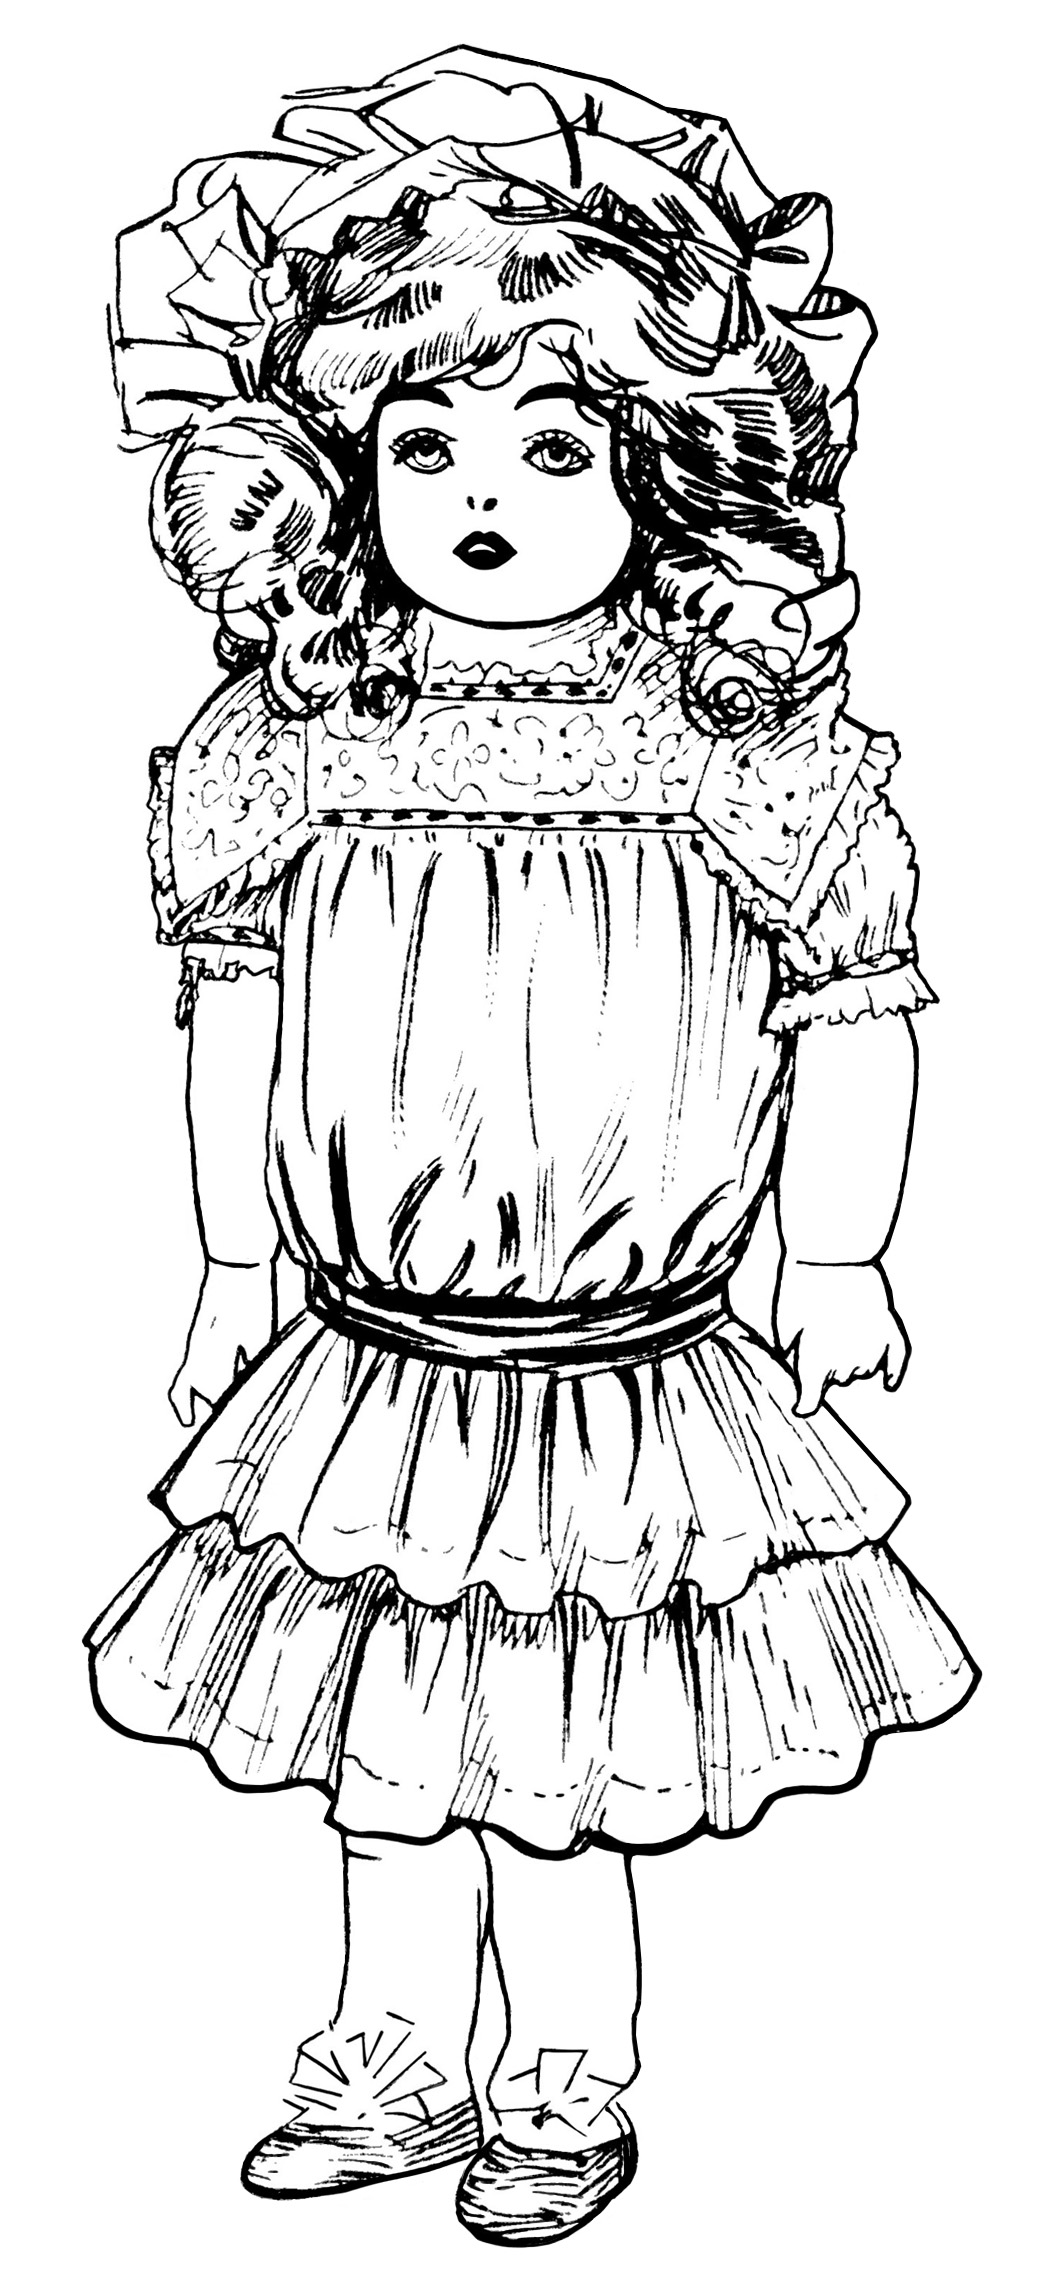 Vintage Doll Clip Art Illustrations  The Images Are From T He February